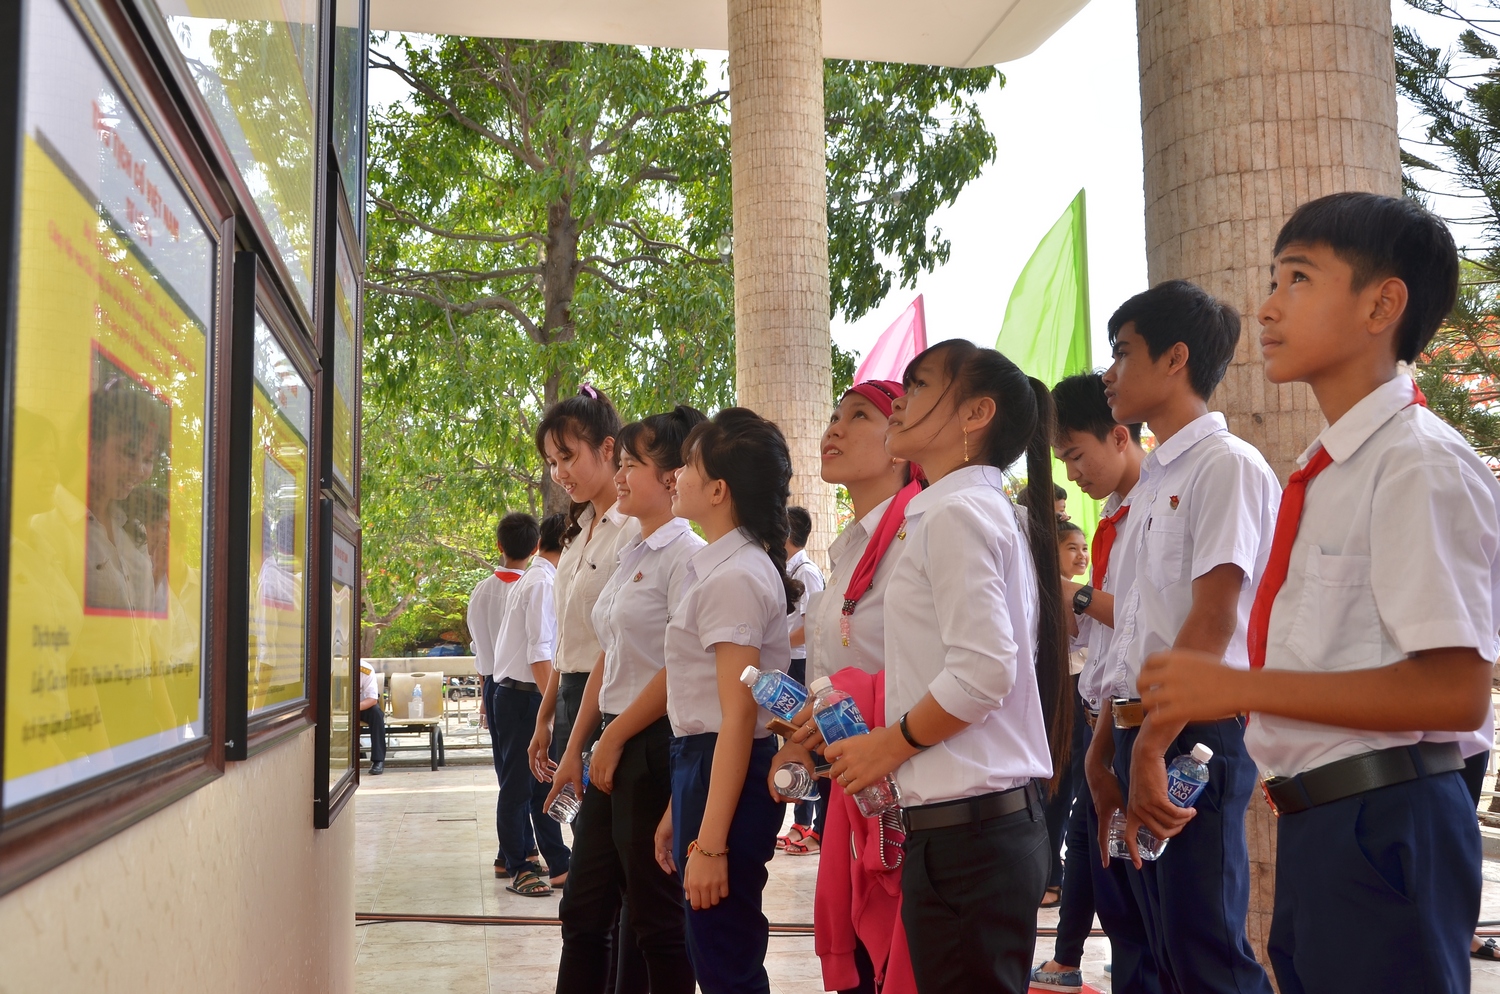 Forms of legal education in educational facilities of national education system in Vietnam